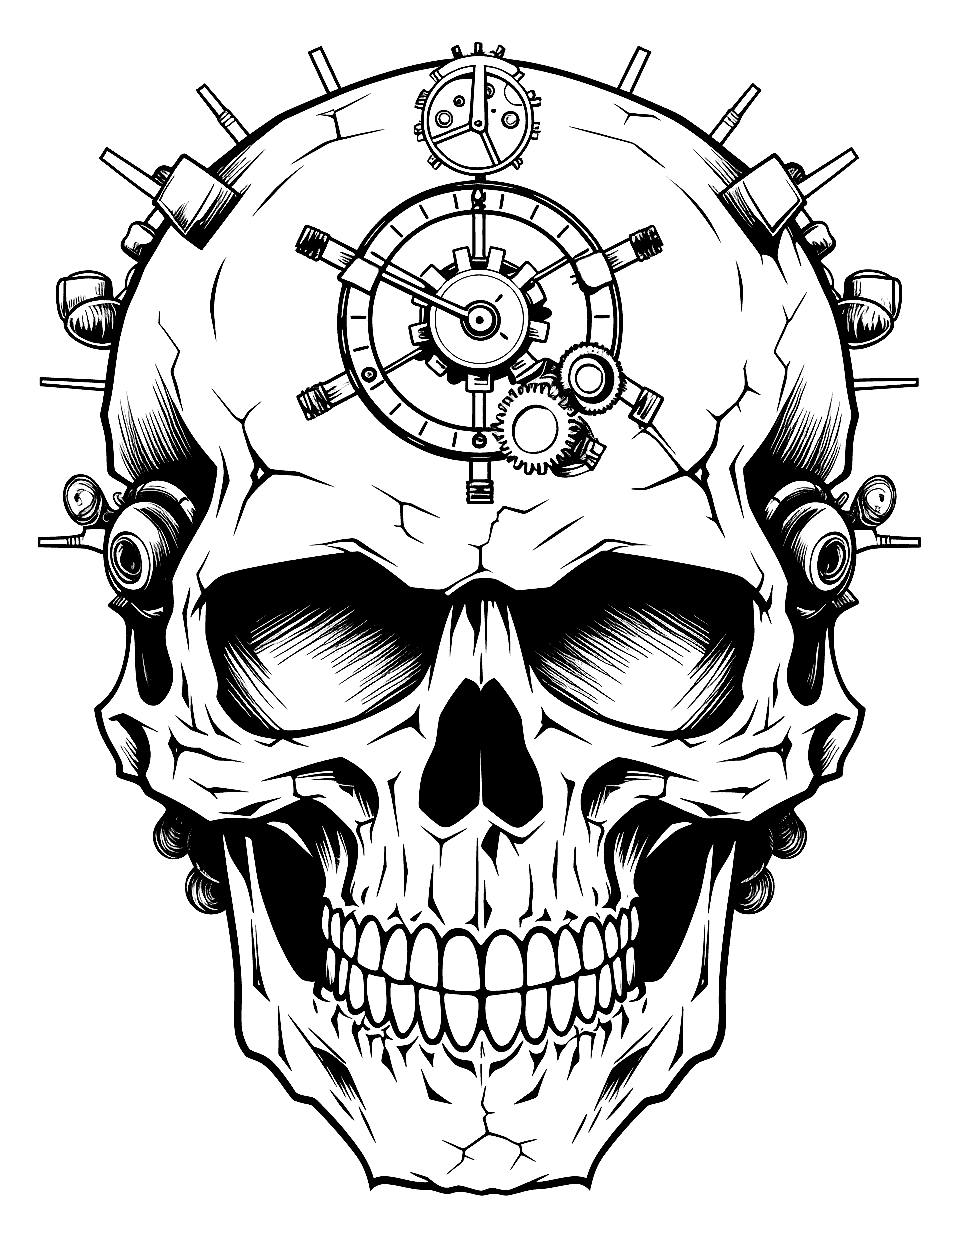 Vintage Clockwork Skull Coloring Page - A skull with visible clock gears and parts reminiscent of steampunk.